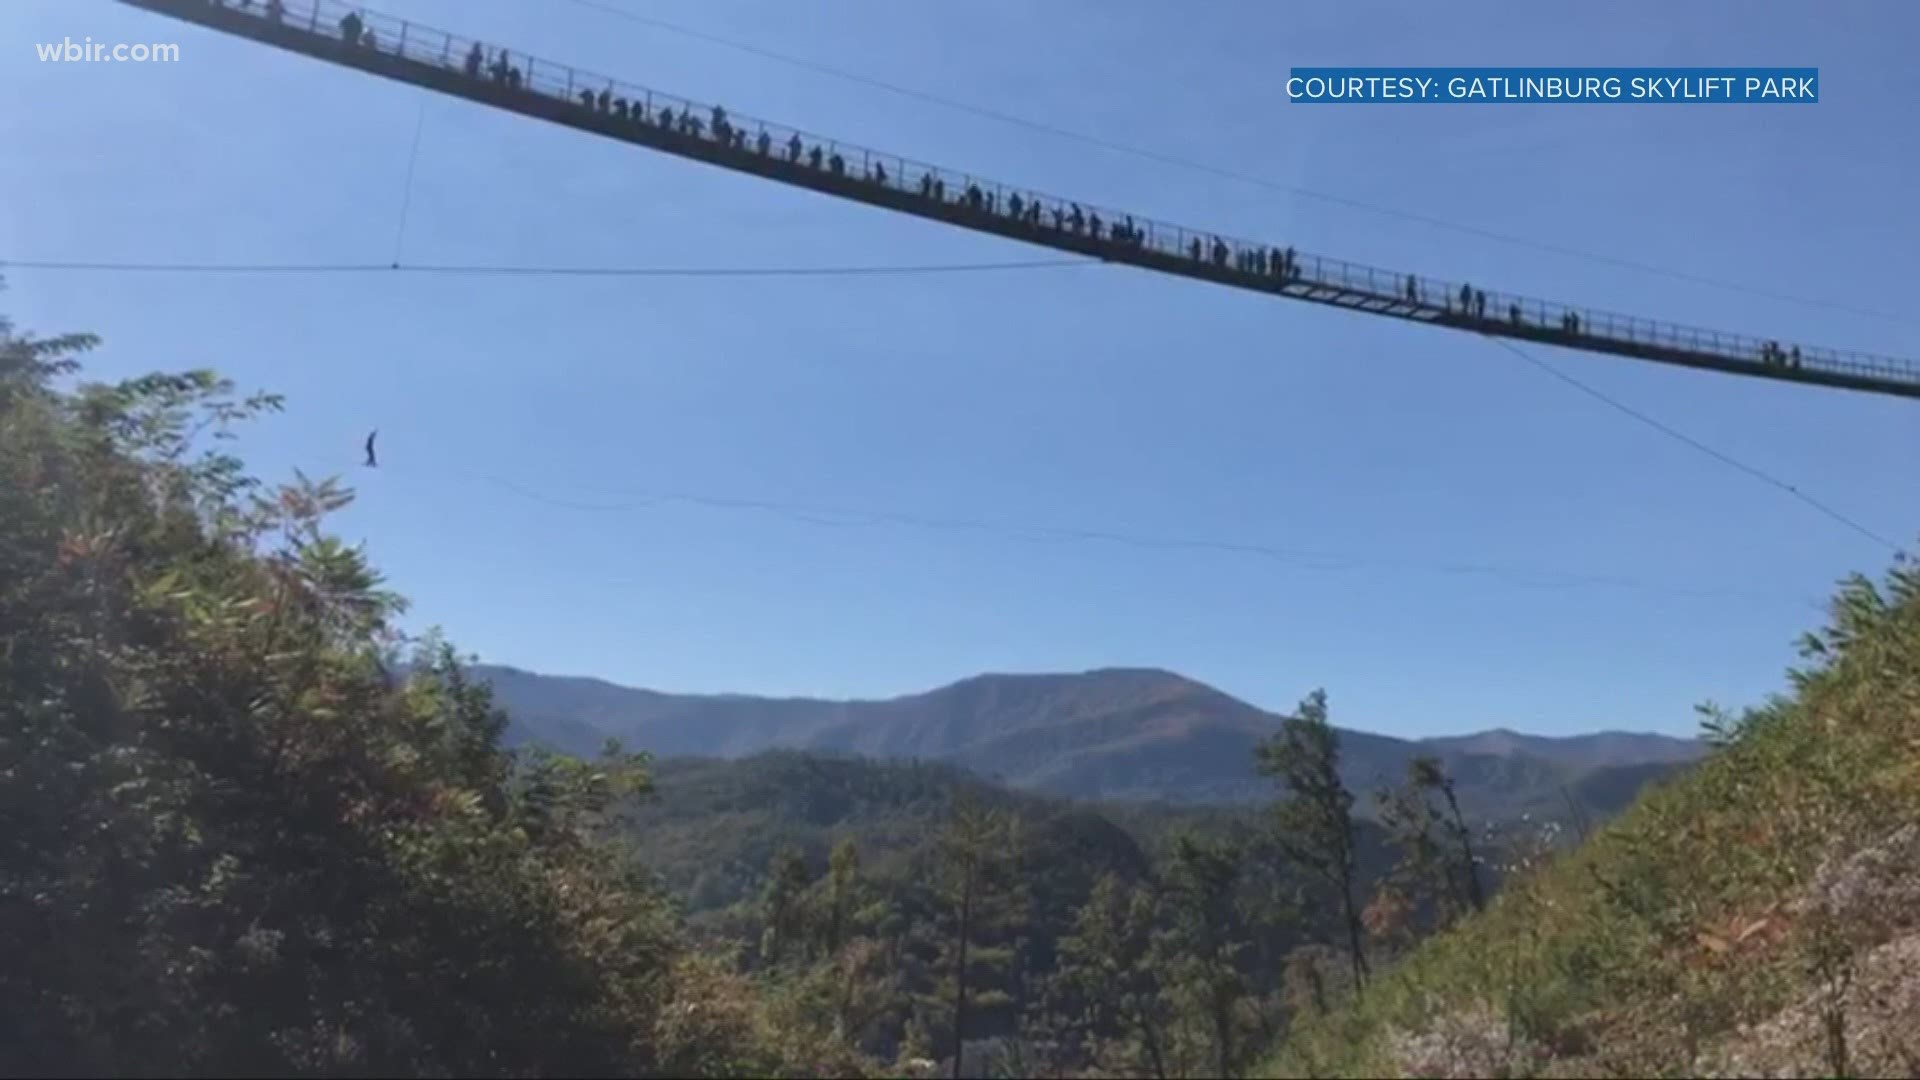 The SkyLift in Gatlinburg hosted the SkyWalk, where people walked across the video on a thin, nylon rope.